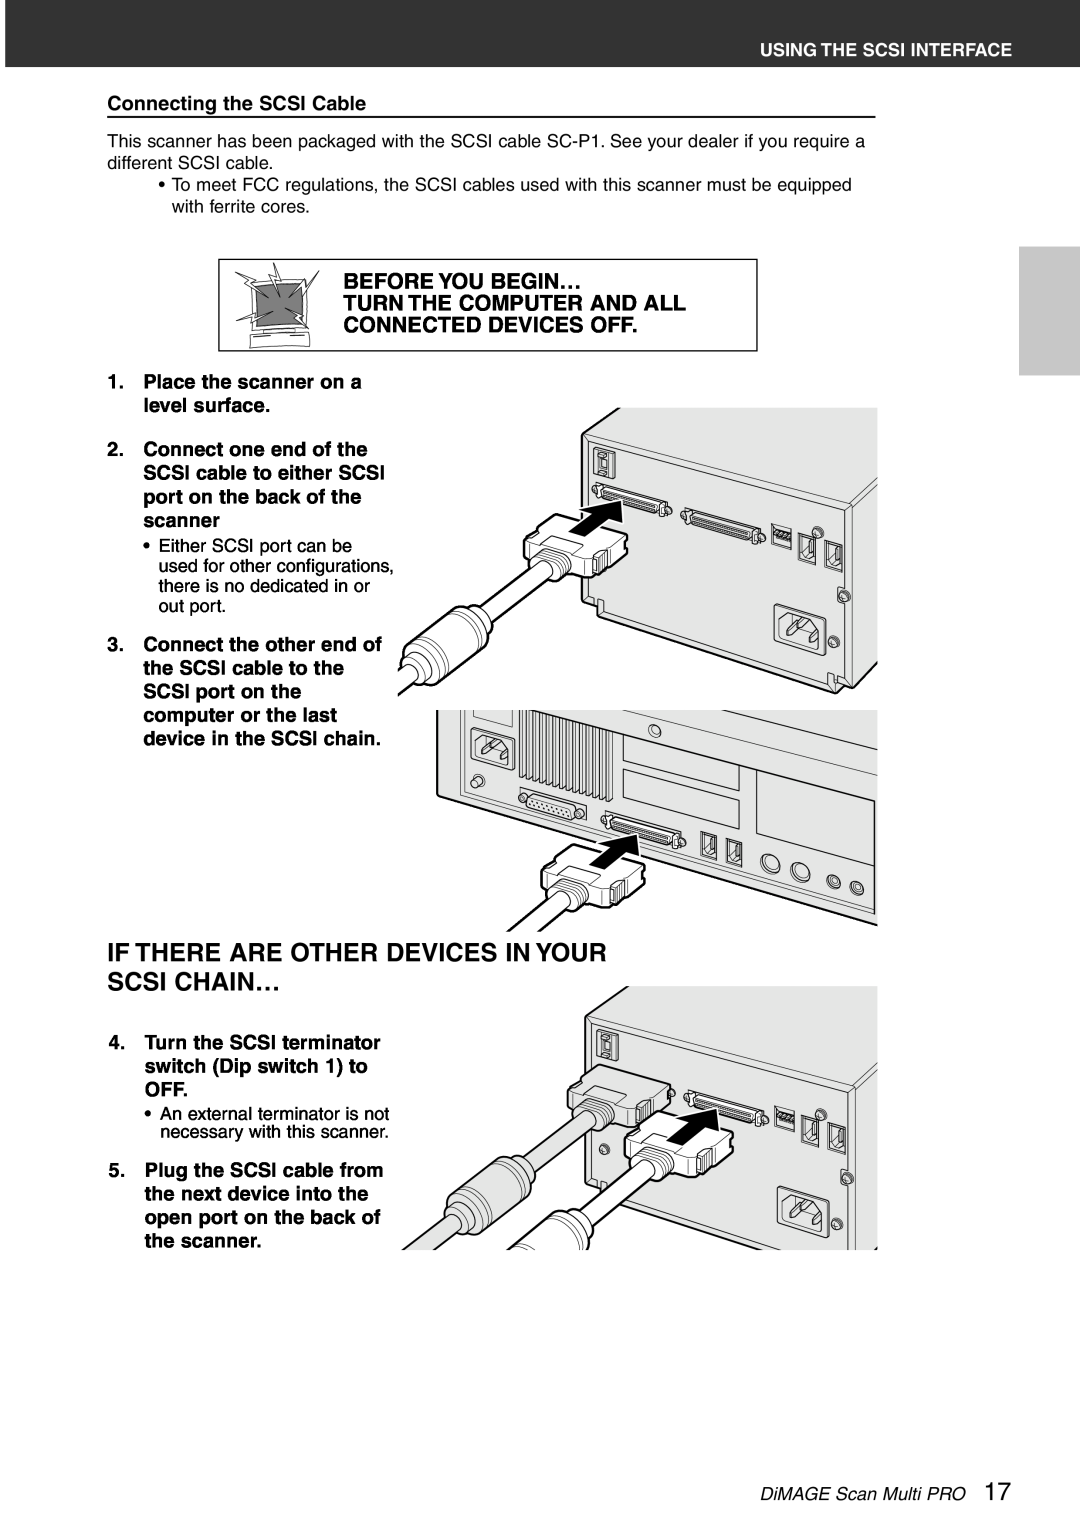 Konica Minolta Scan Multi PRO instruction manual If There Are Other Devices In Your Scsi Chain…, Connecting the SCSI Cable 